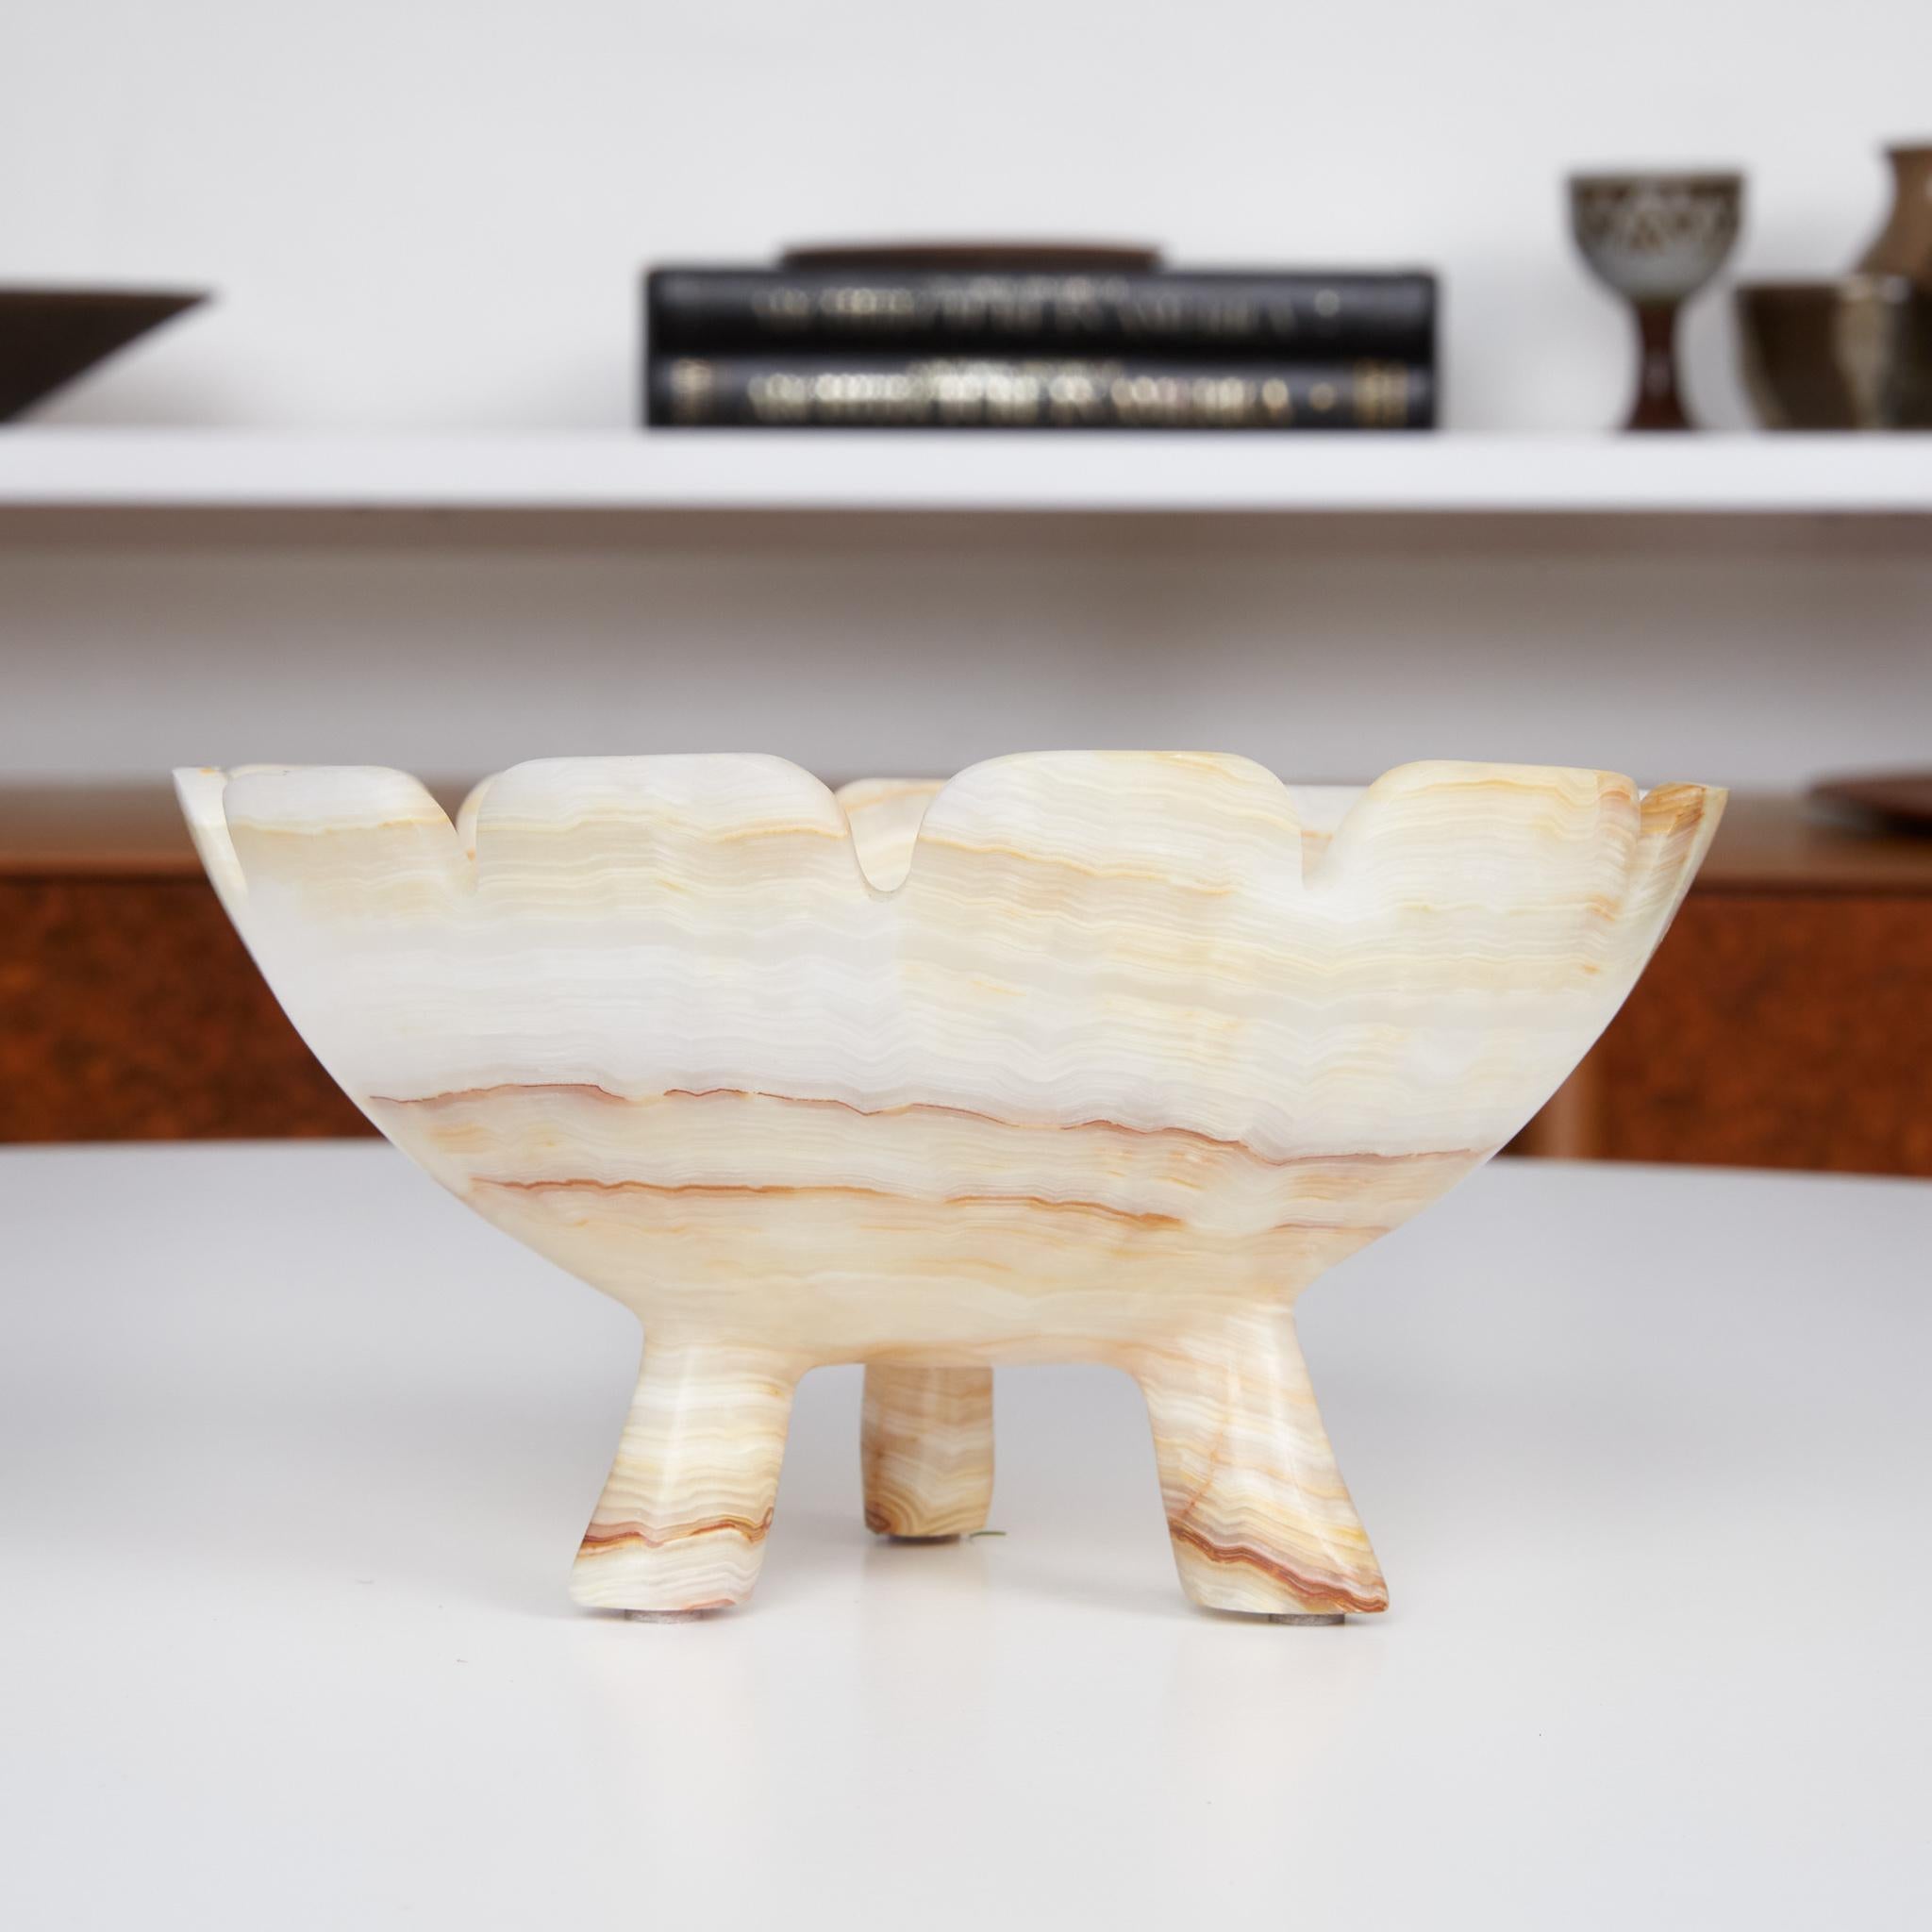 Hand carved alabaster bowl. This bowl is carved from a beautiful cream colored stone, accented with earthy brown, tan and orange veining. Carved from one piece, the tapered legs are part of the bowl creating a special seamless object. The wide top